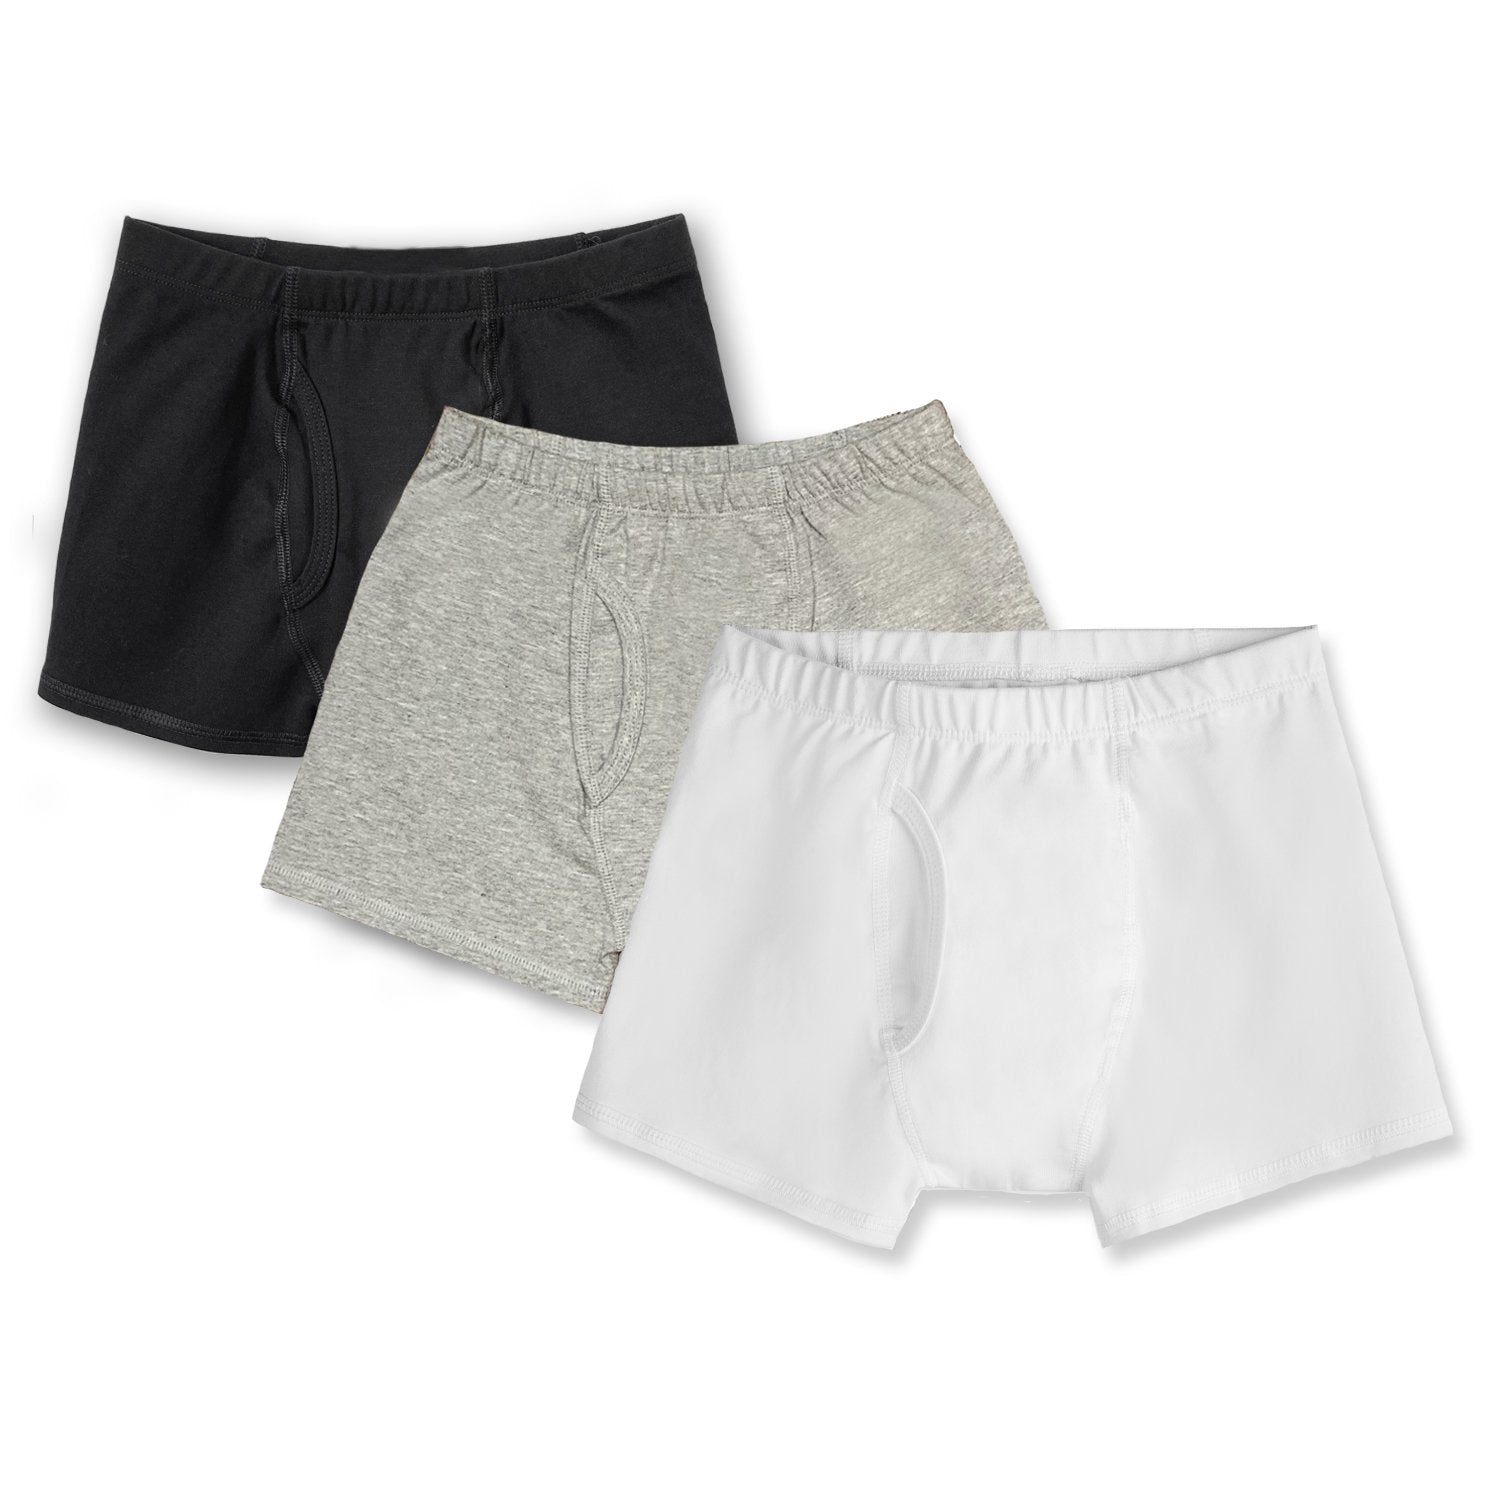 Organic Cotton Kids Boxer Briefs 6-Pack FINAL SALE - Mightly